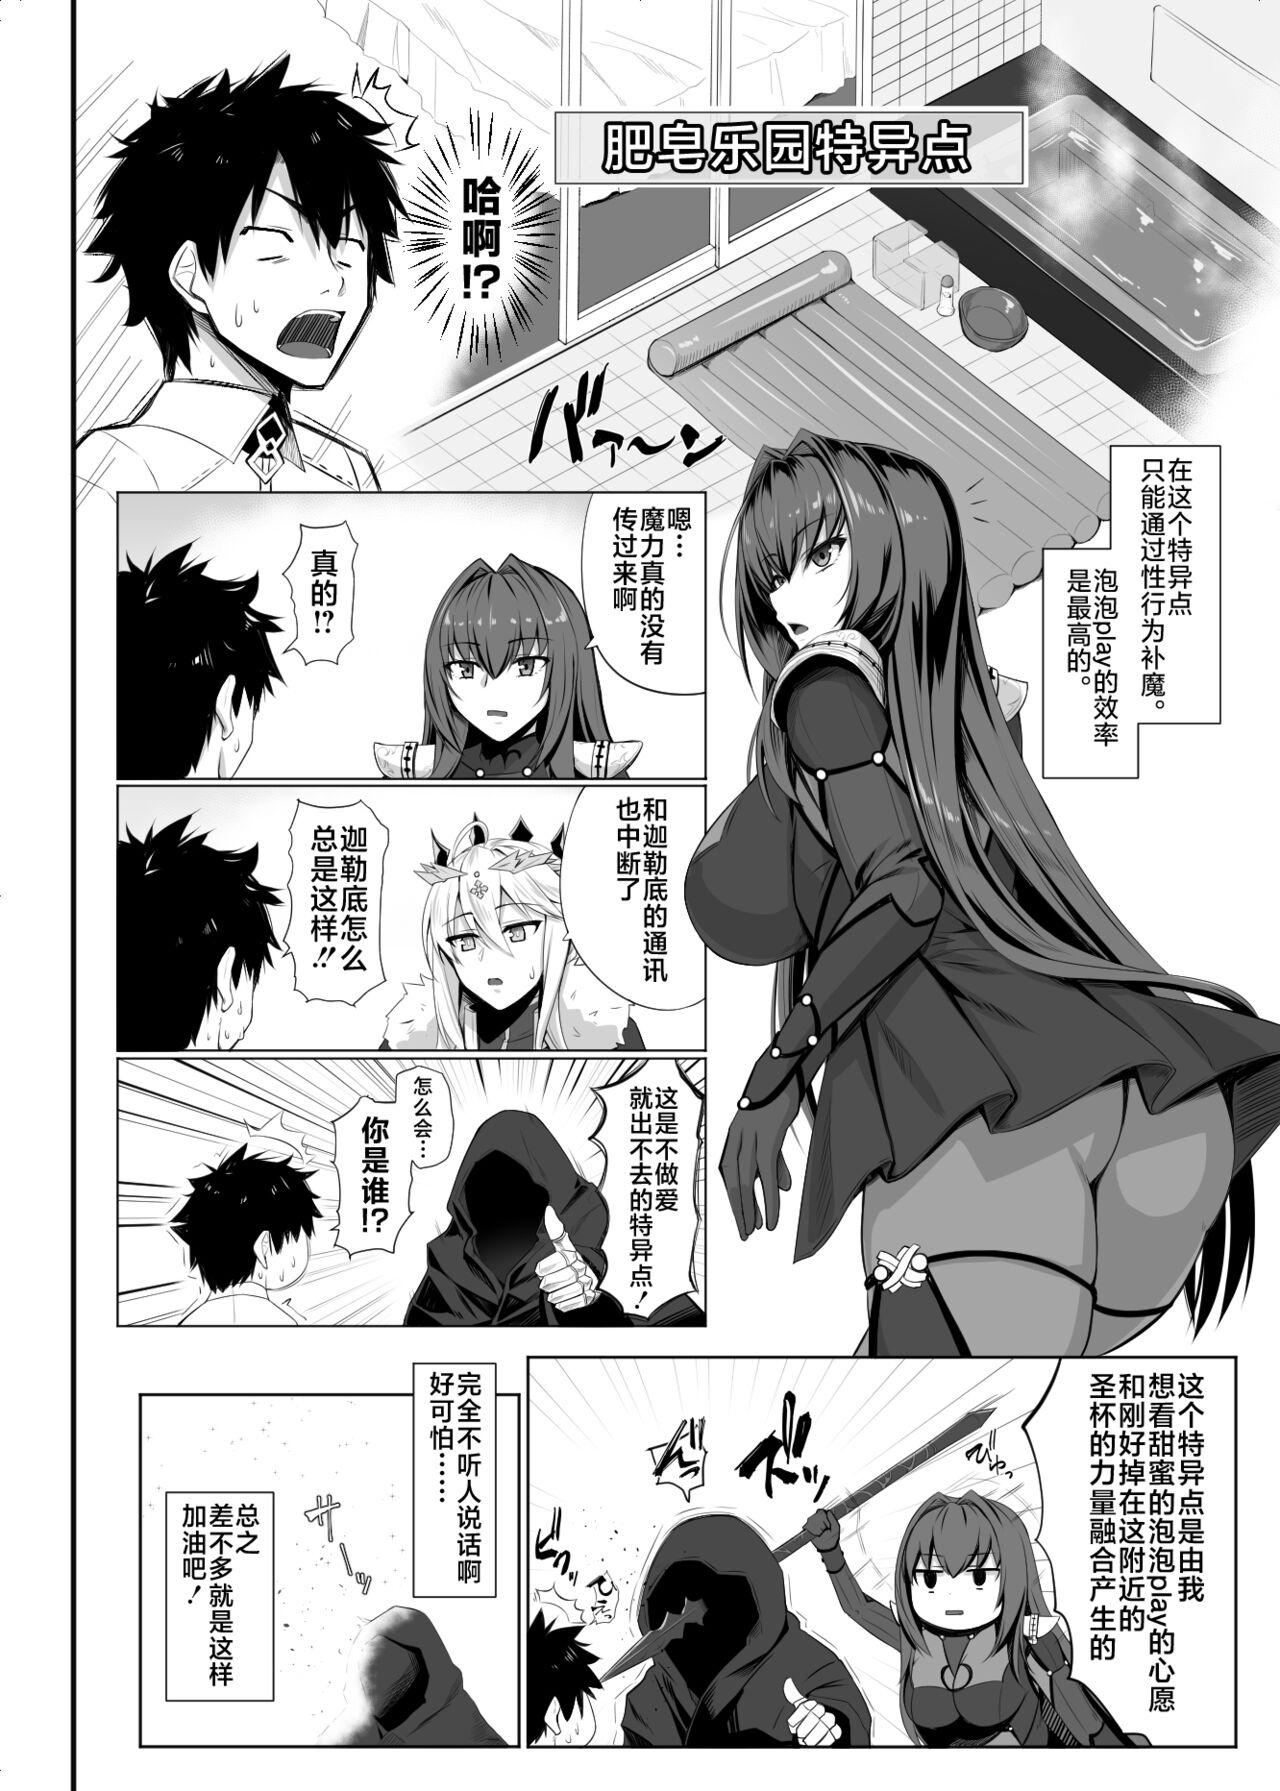 Teenfuns ランランランサーズ - Fate grand order Sesso - Page 3